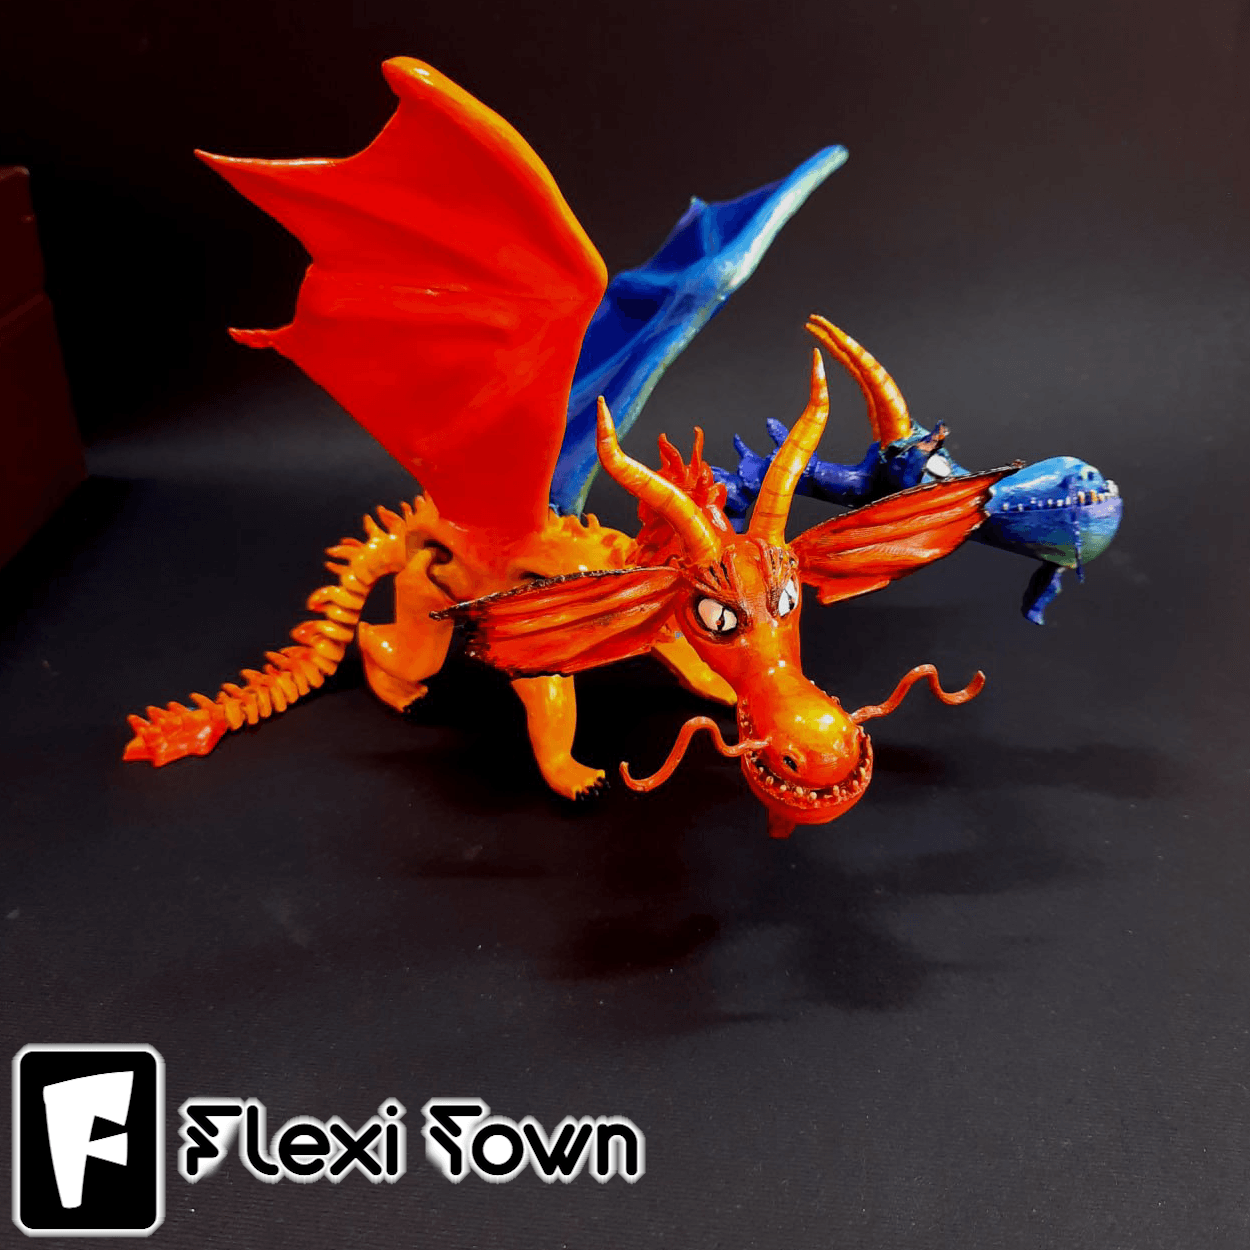 Flexi Print-in-Place Two-Headed Dragon Wu and Wei 3d model